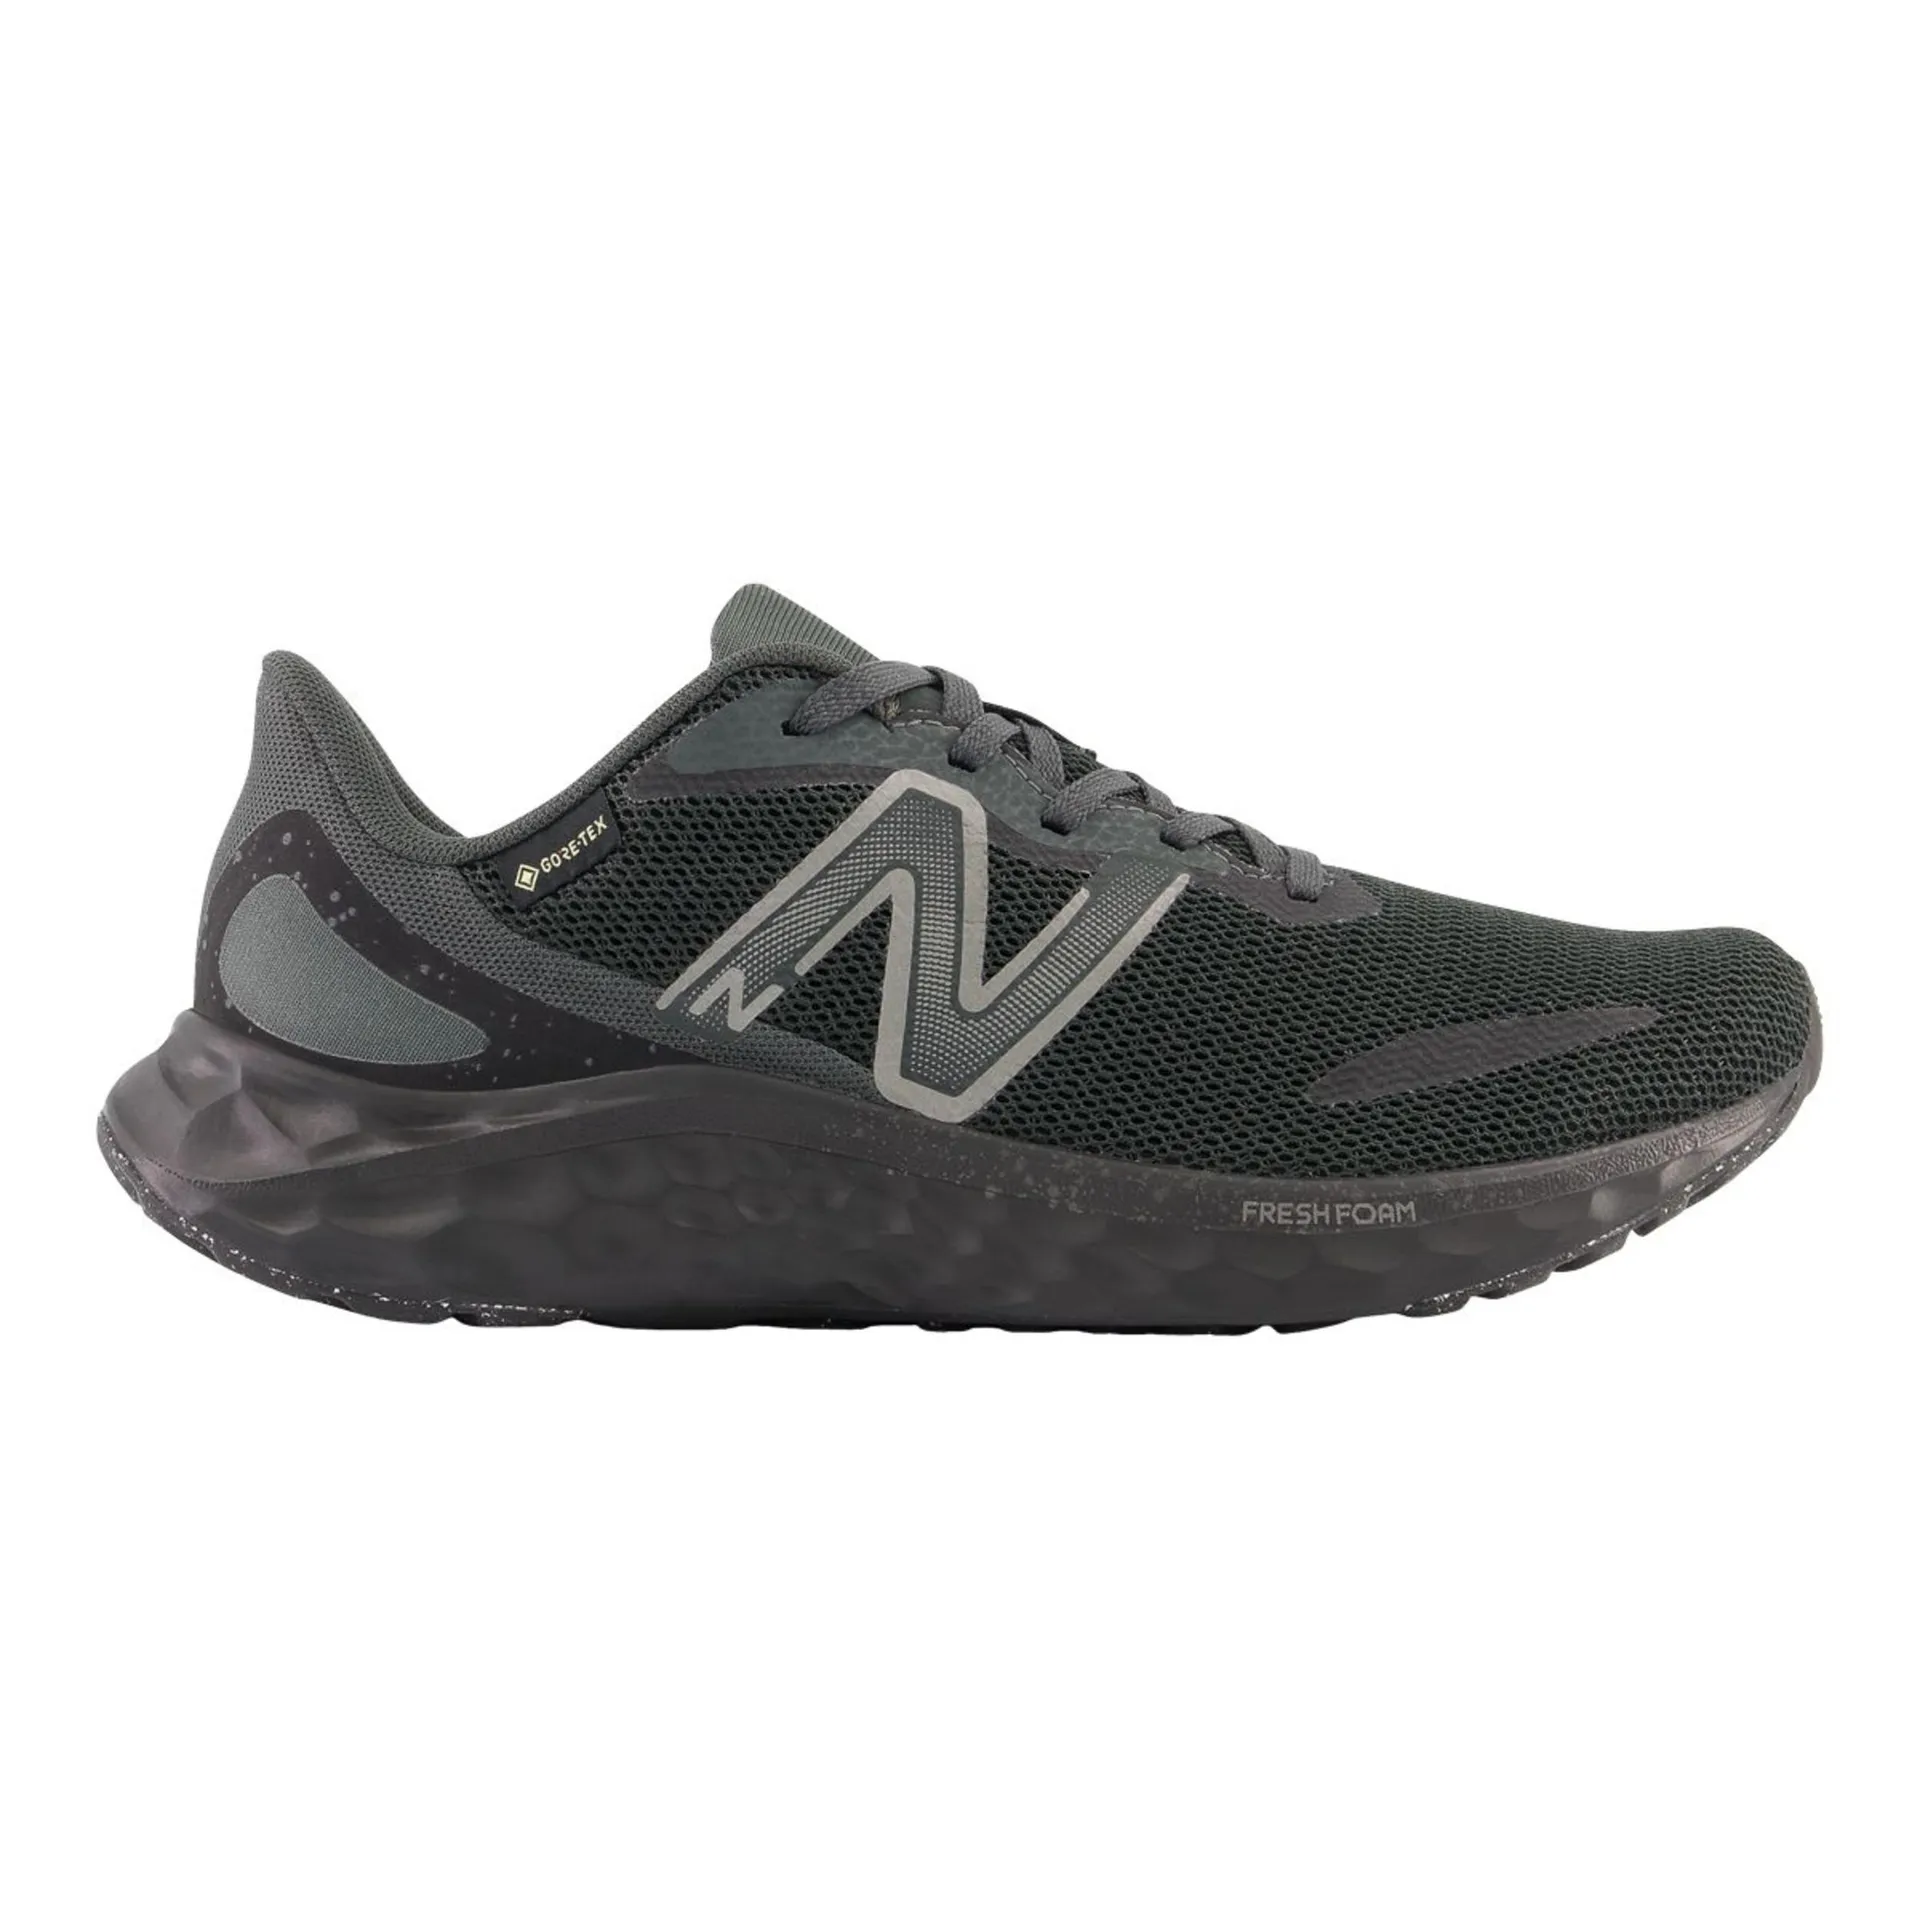 New Balance Women's Fuelcell Arishi Gore-Tex Waterproof Breathable Running Shoes